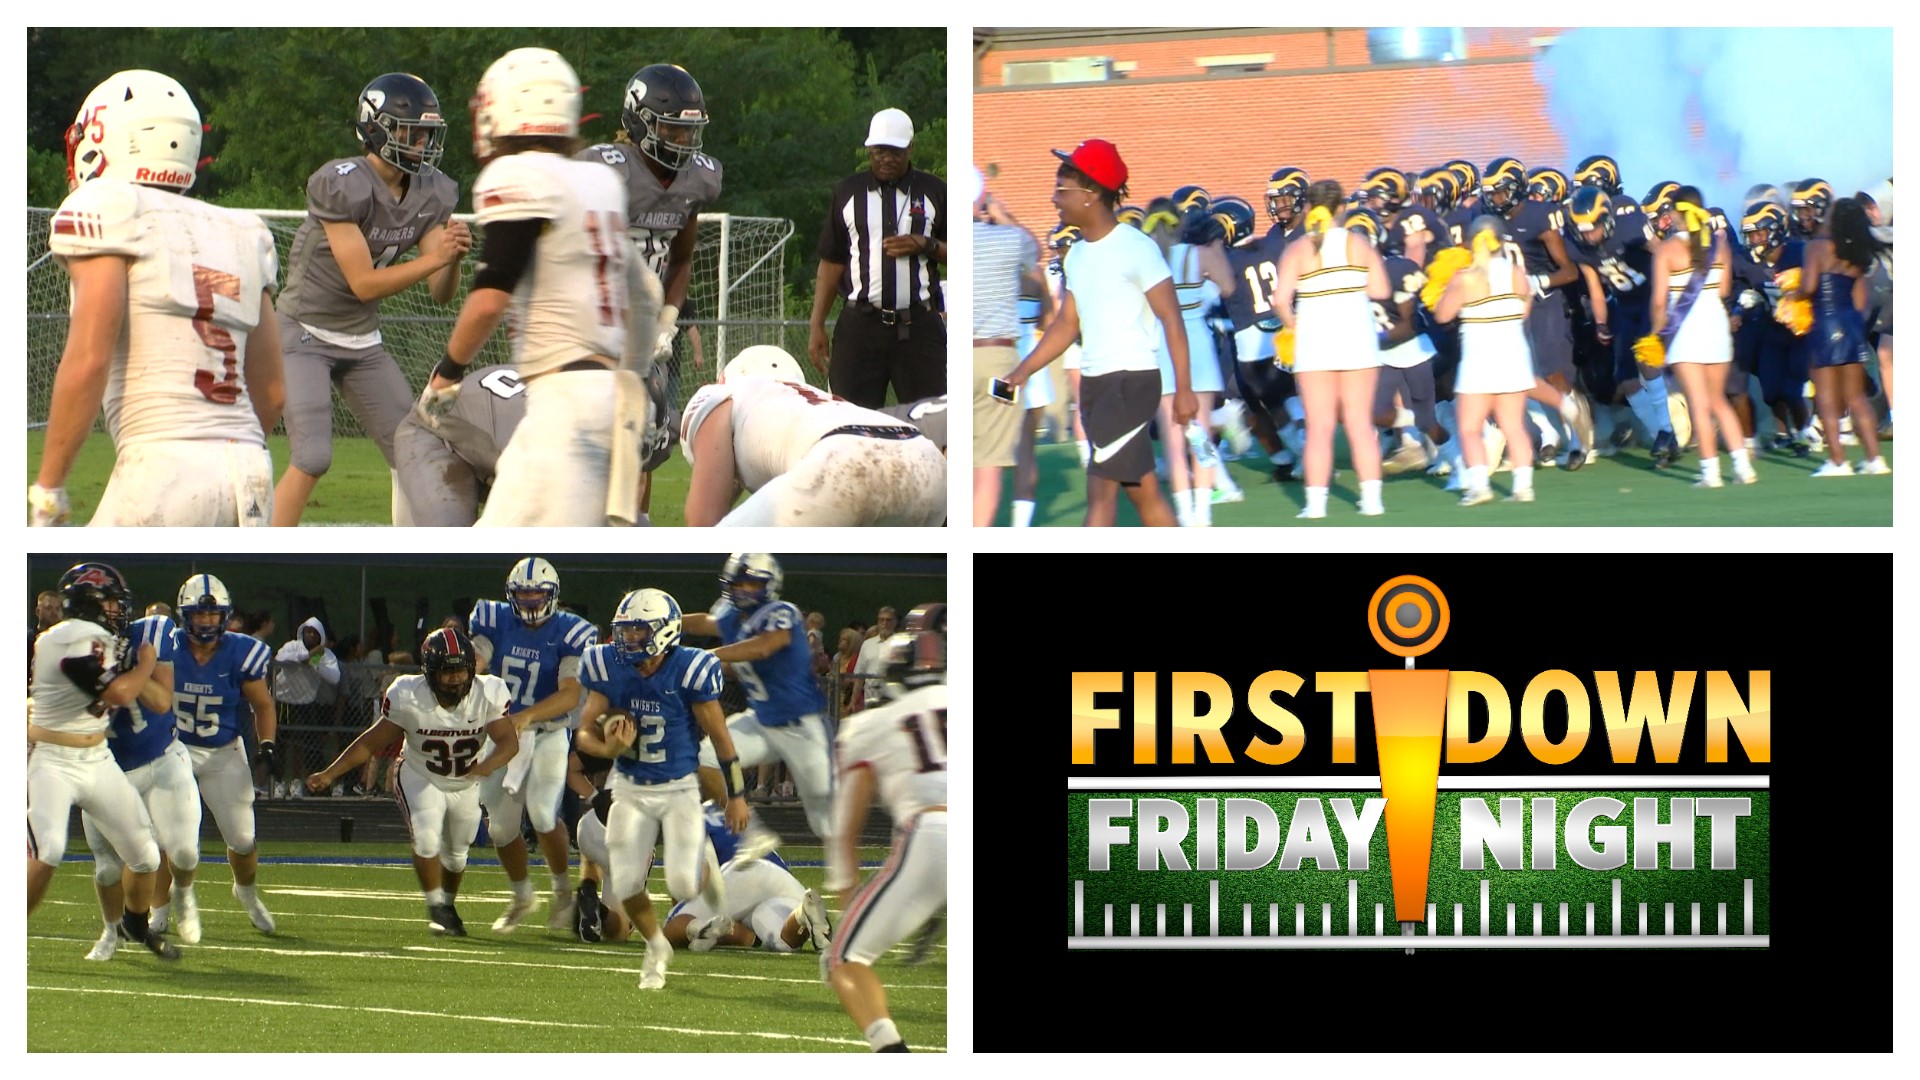 The road to the AHSAA Super 7 in December officially began tonight with Week Zero action. We've got tons of scores and highlights on First Down Friday Night.